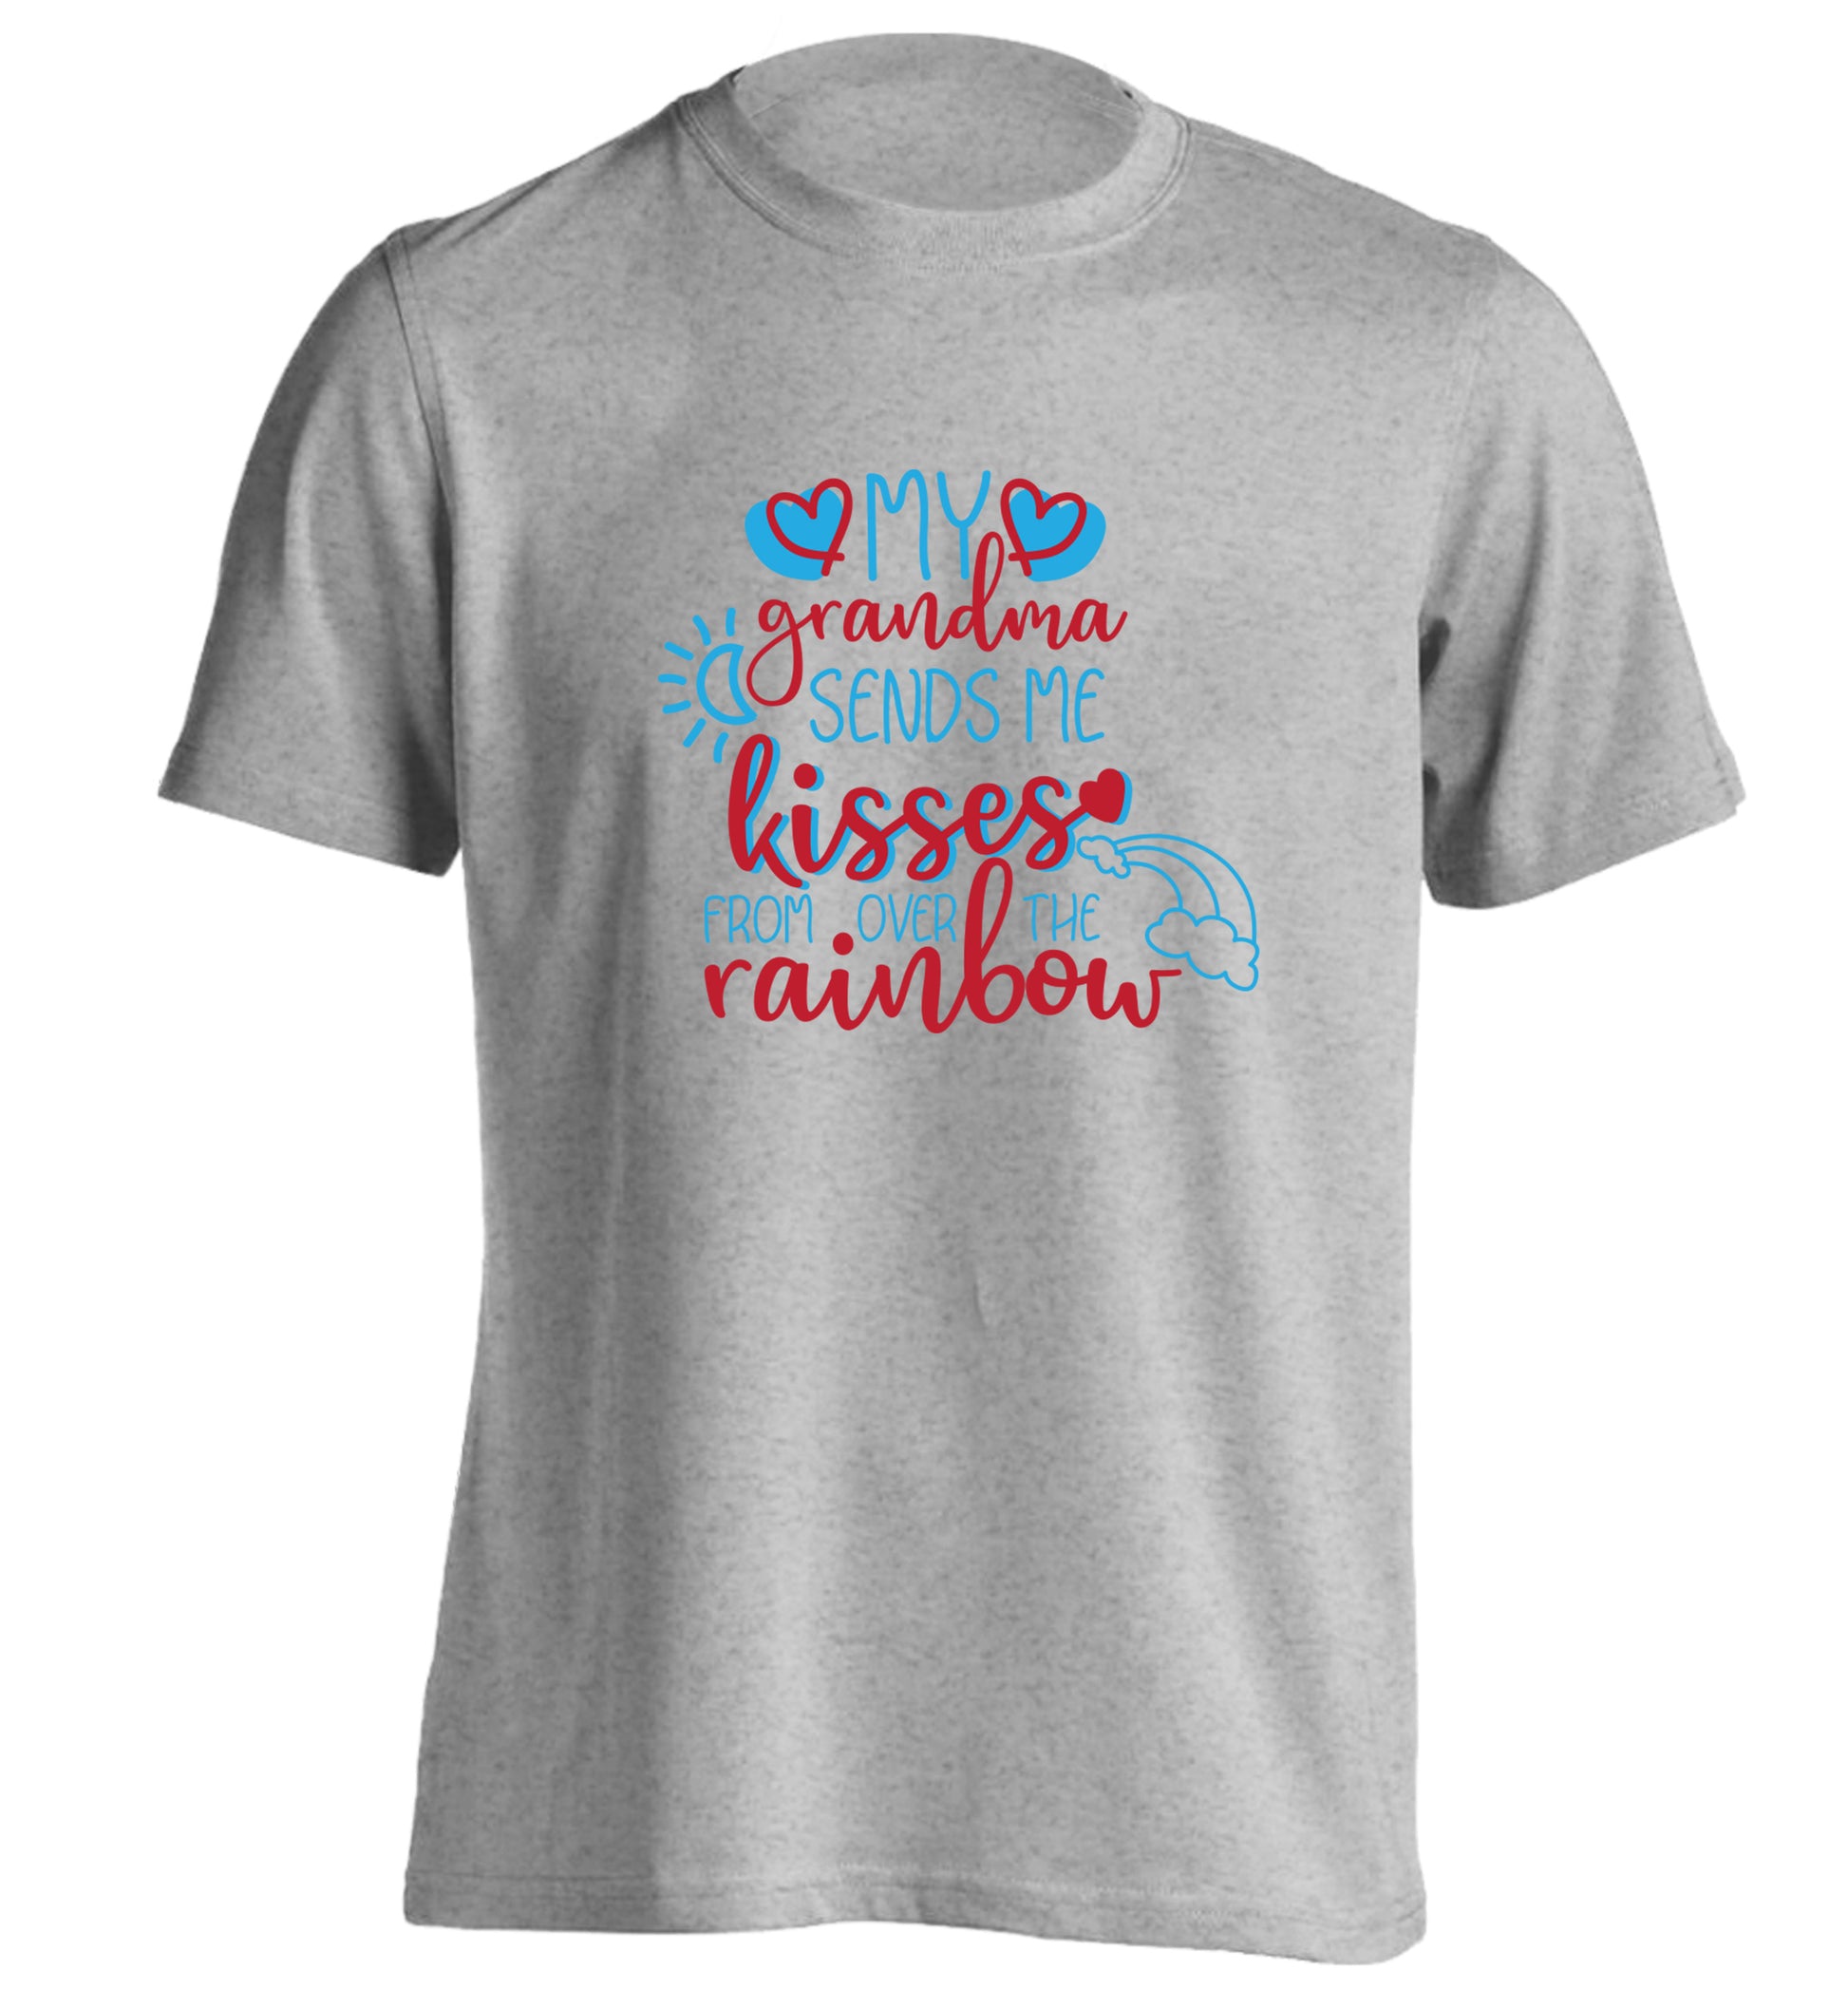 My grandma sends me kisses from over the rainbow adults unisex grey Tshirt 2XL